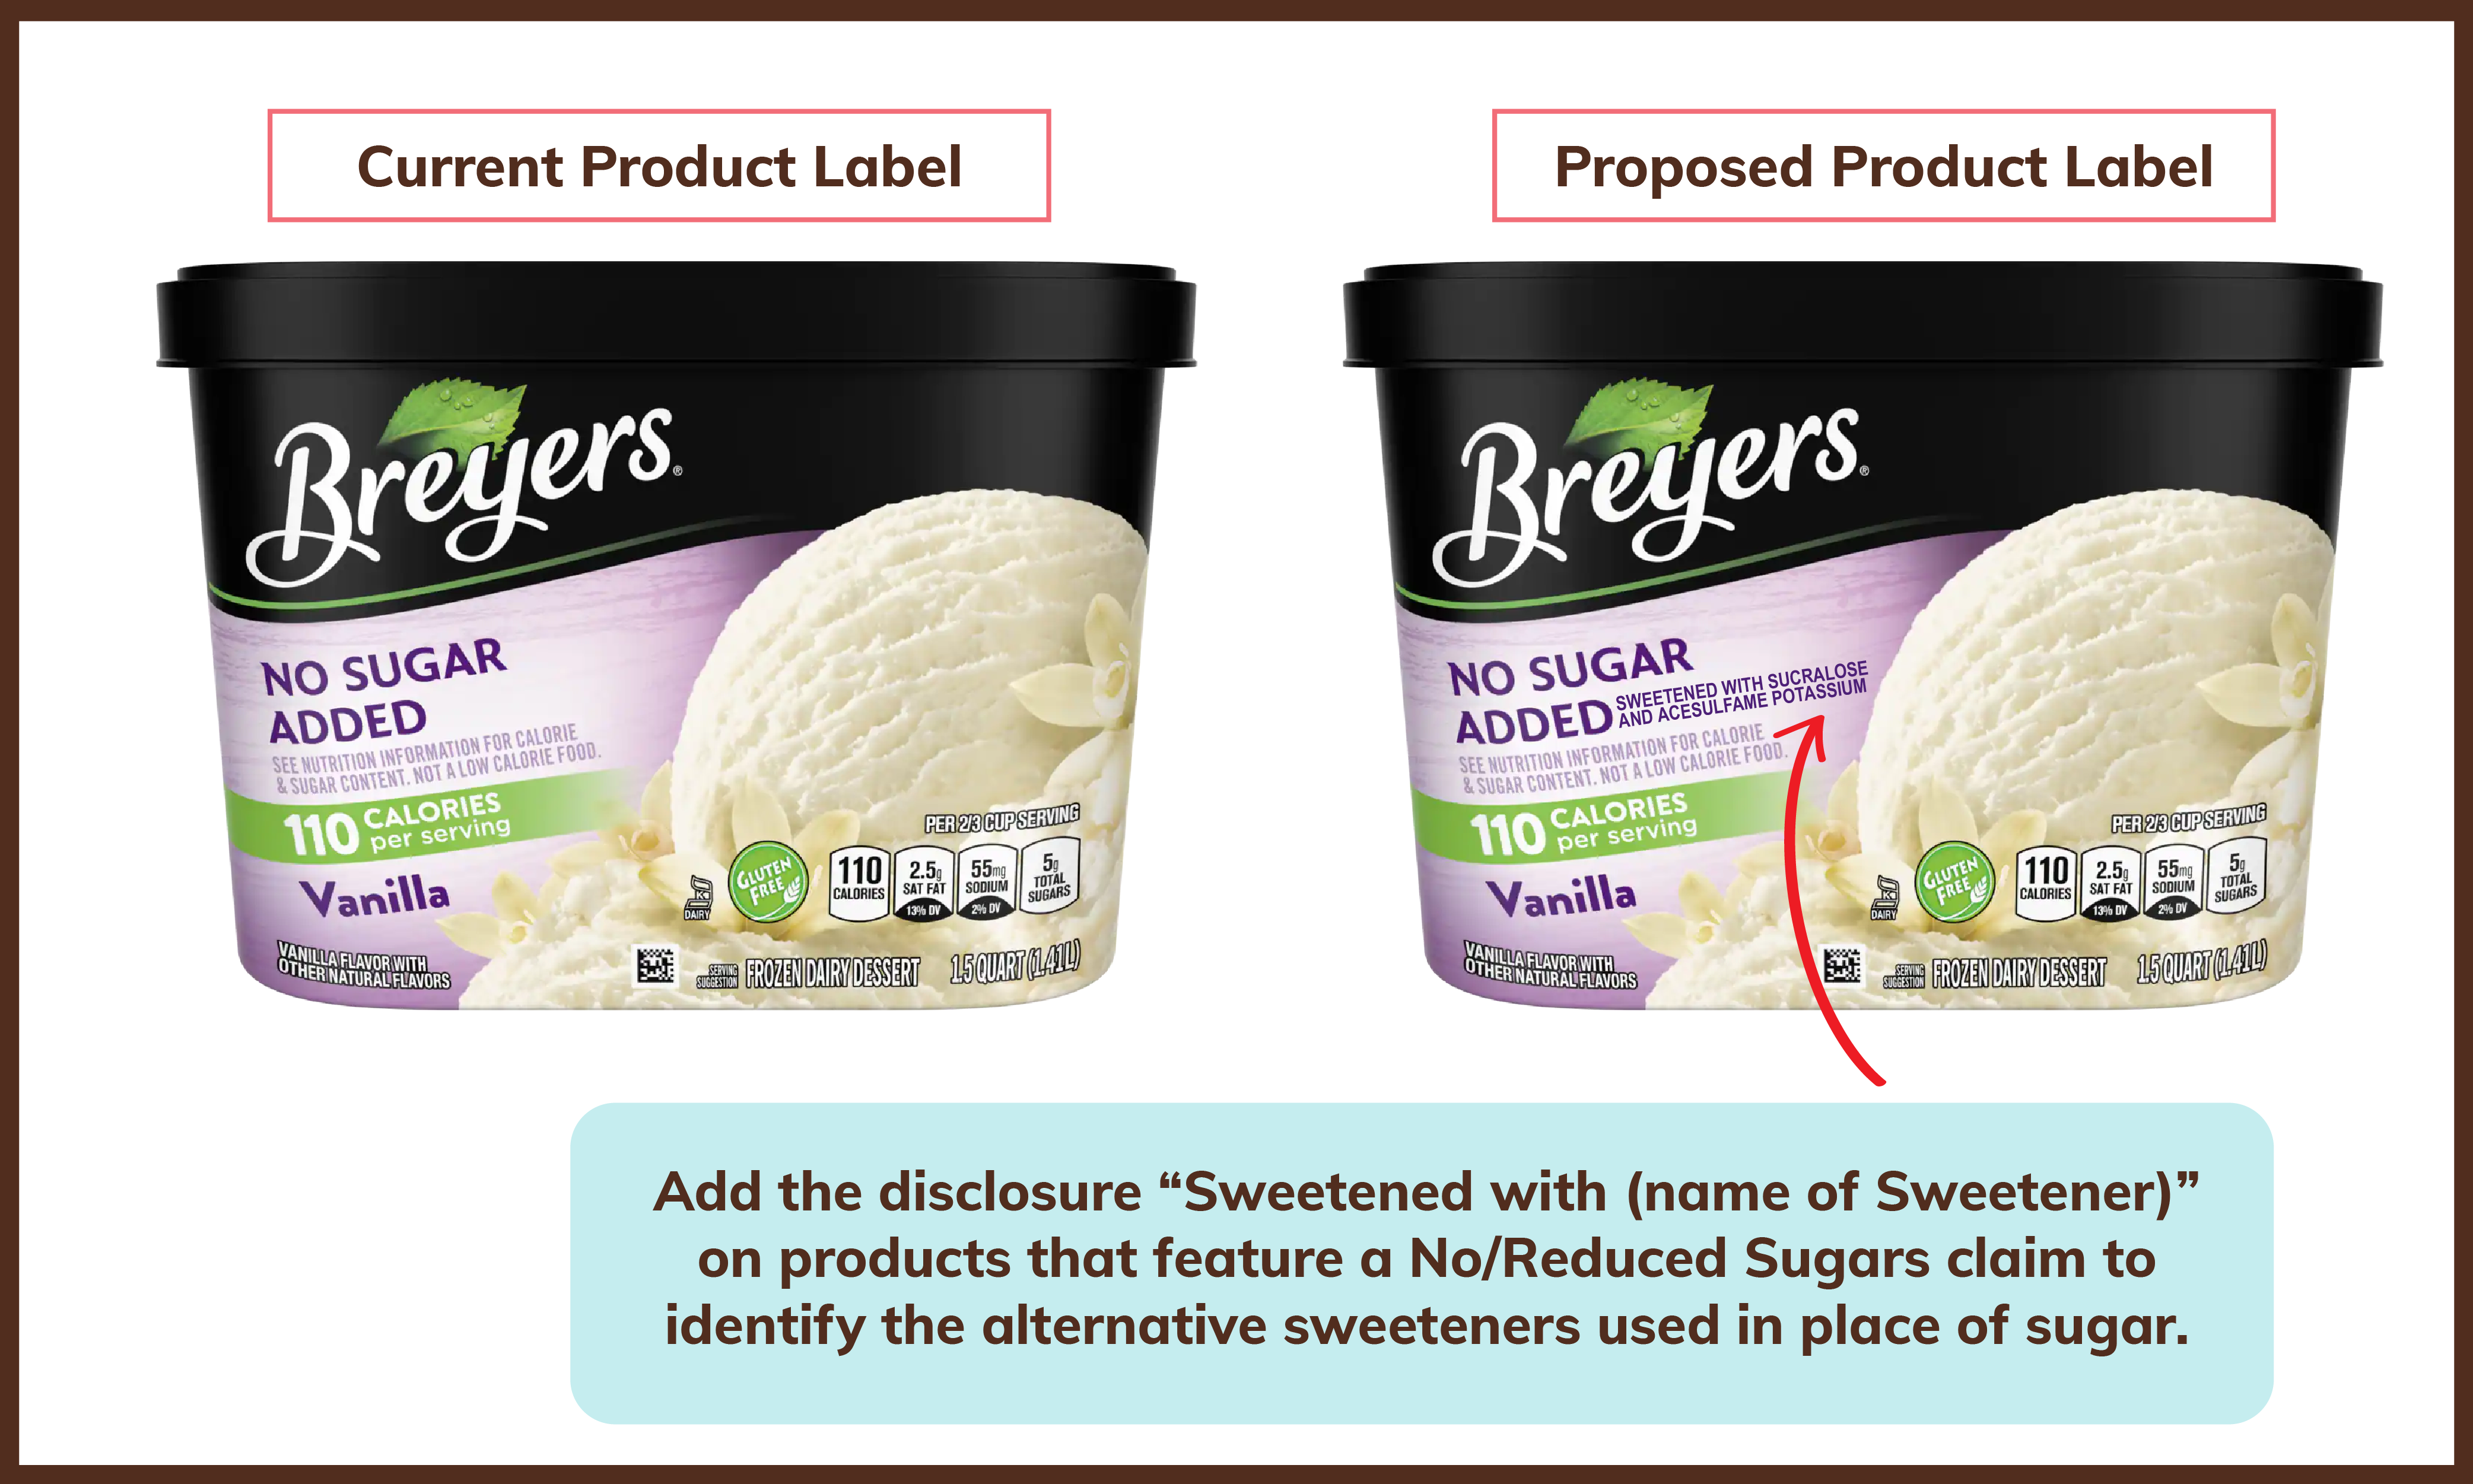 Product Examples_Breyers current-proposed label